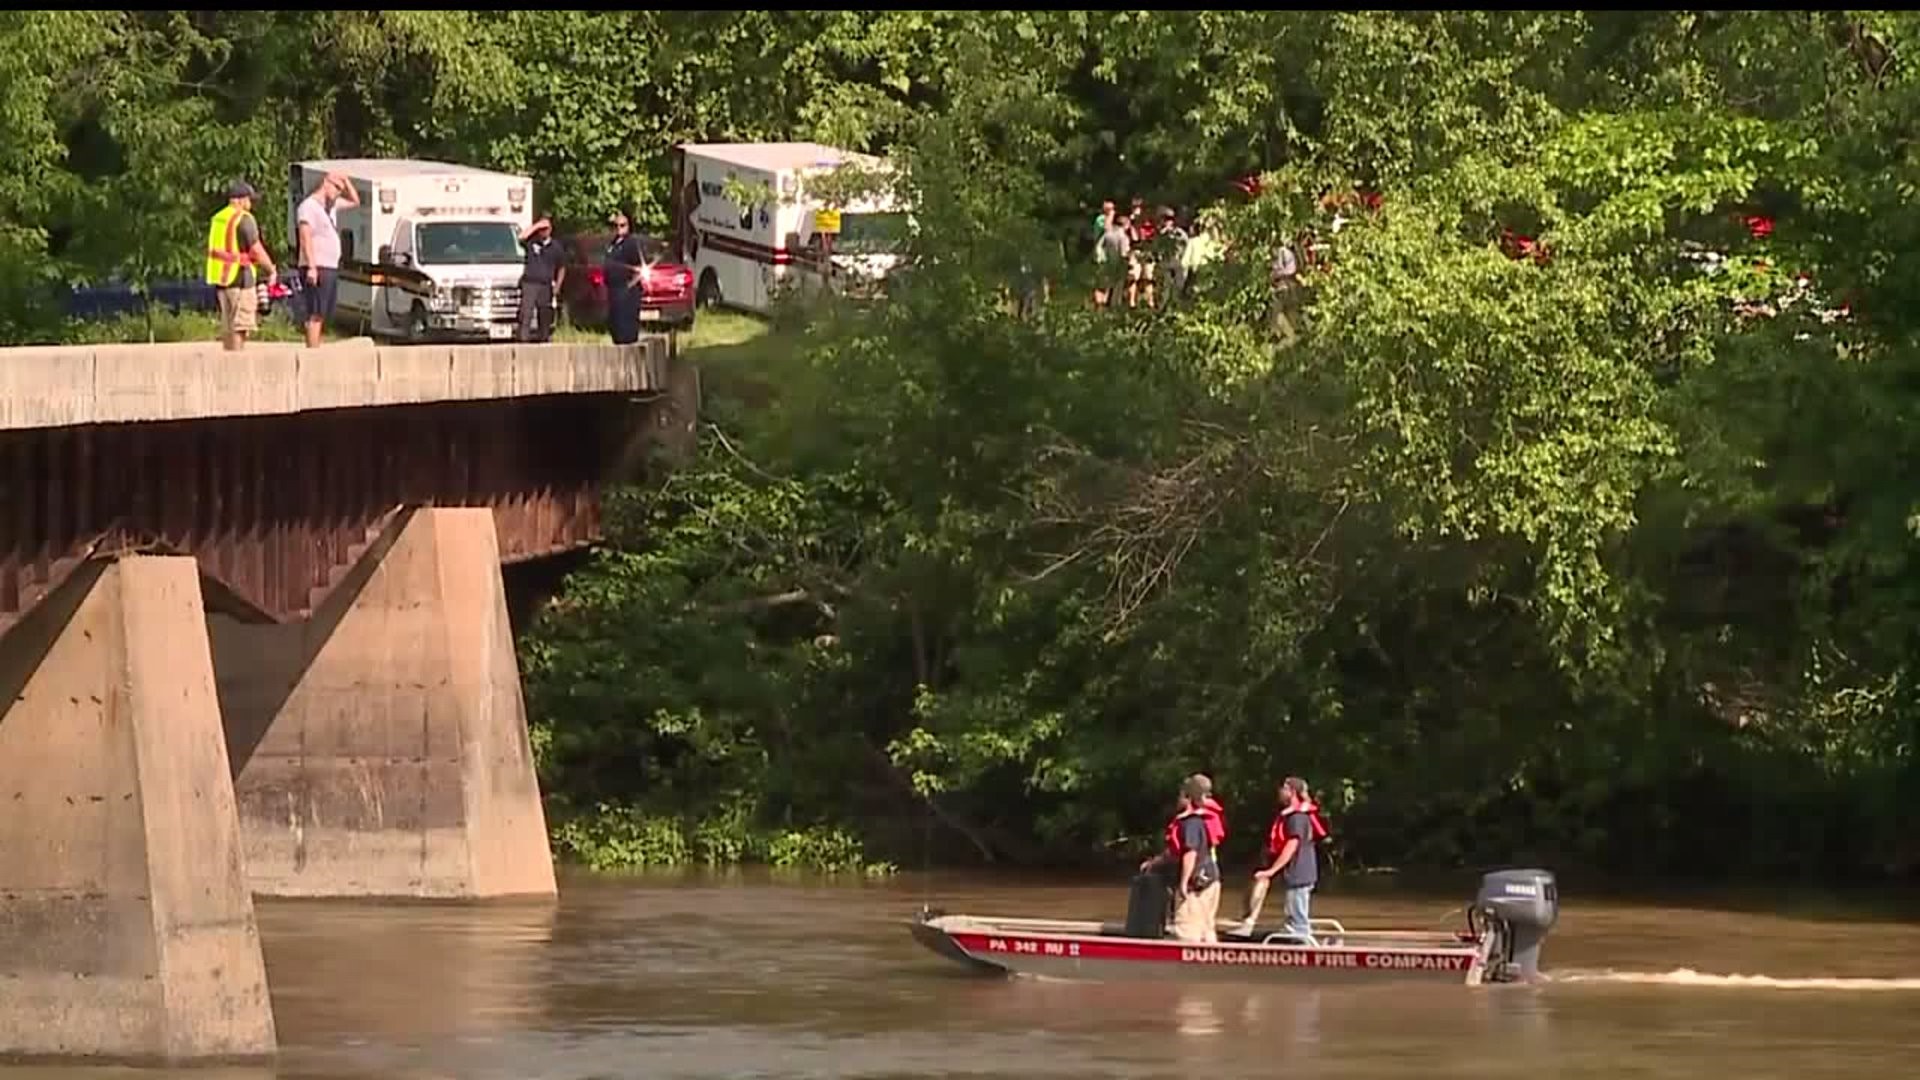 Crews suspend search for missing 8-year-old boy in Susquehanna River